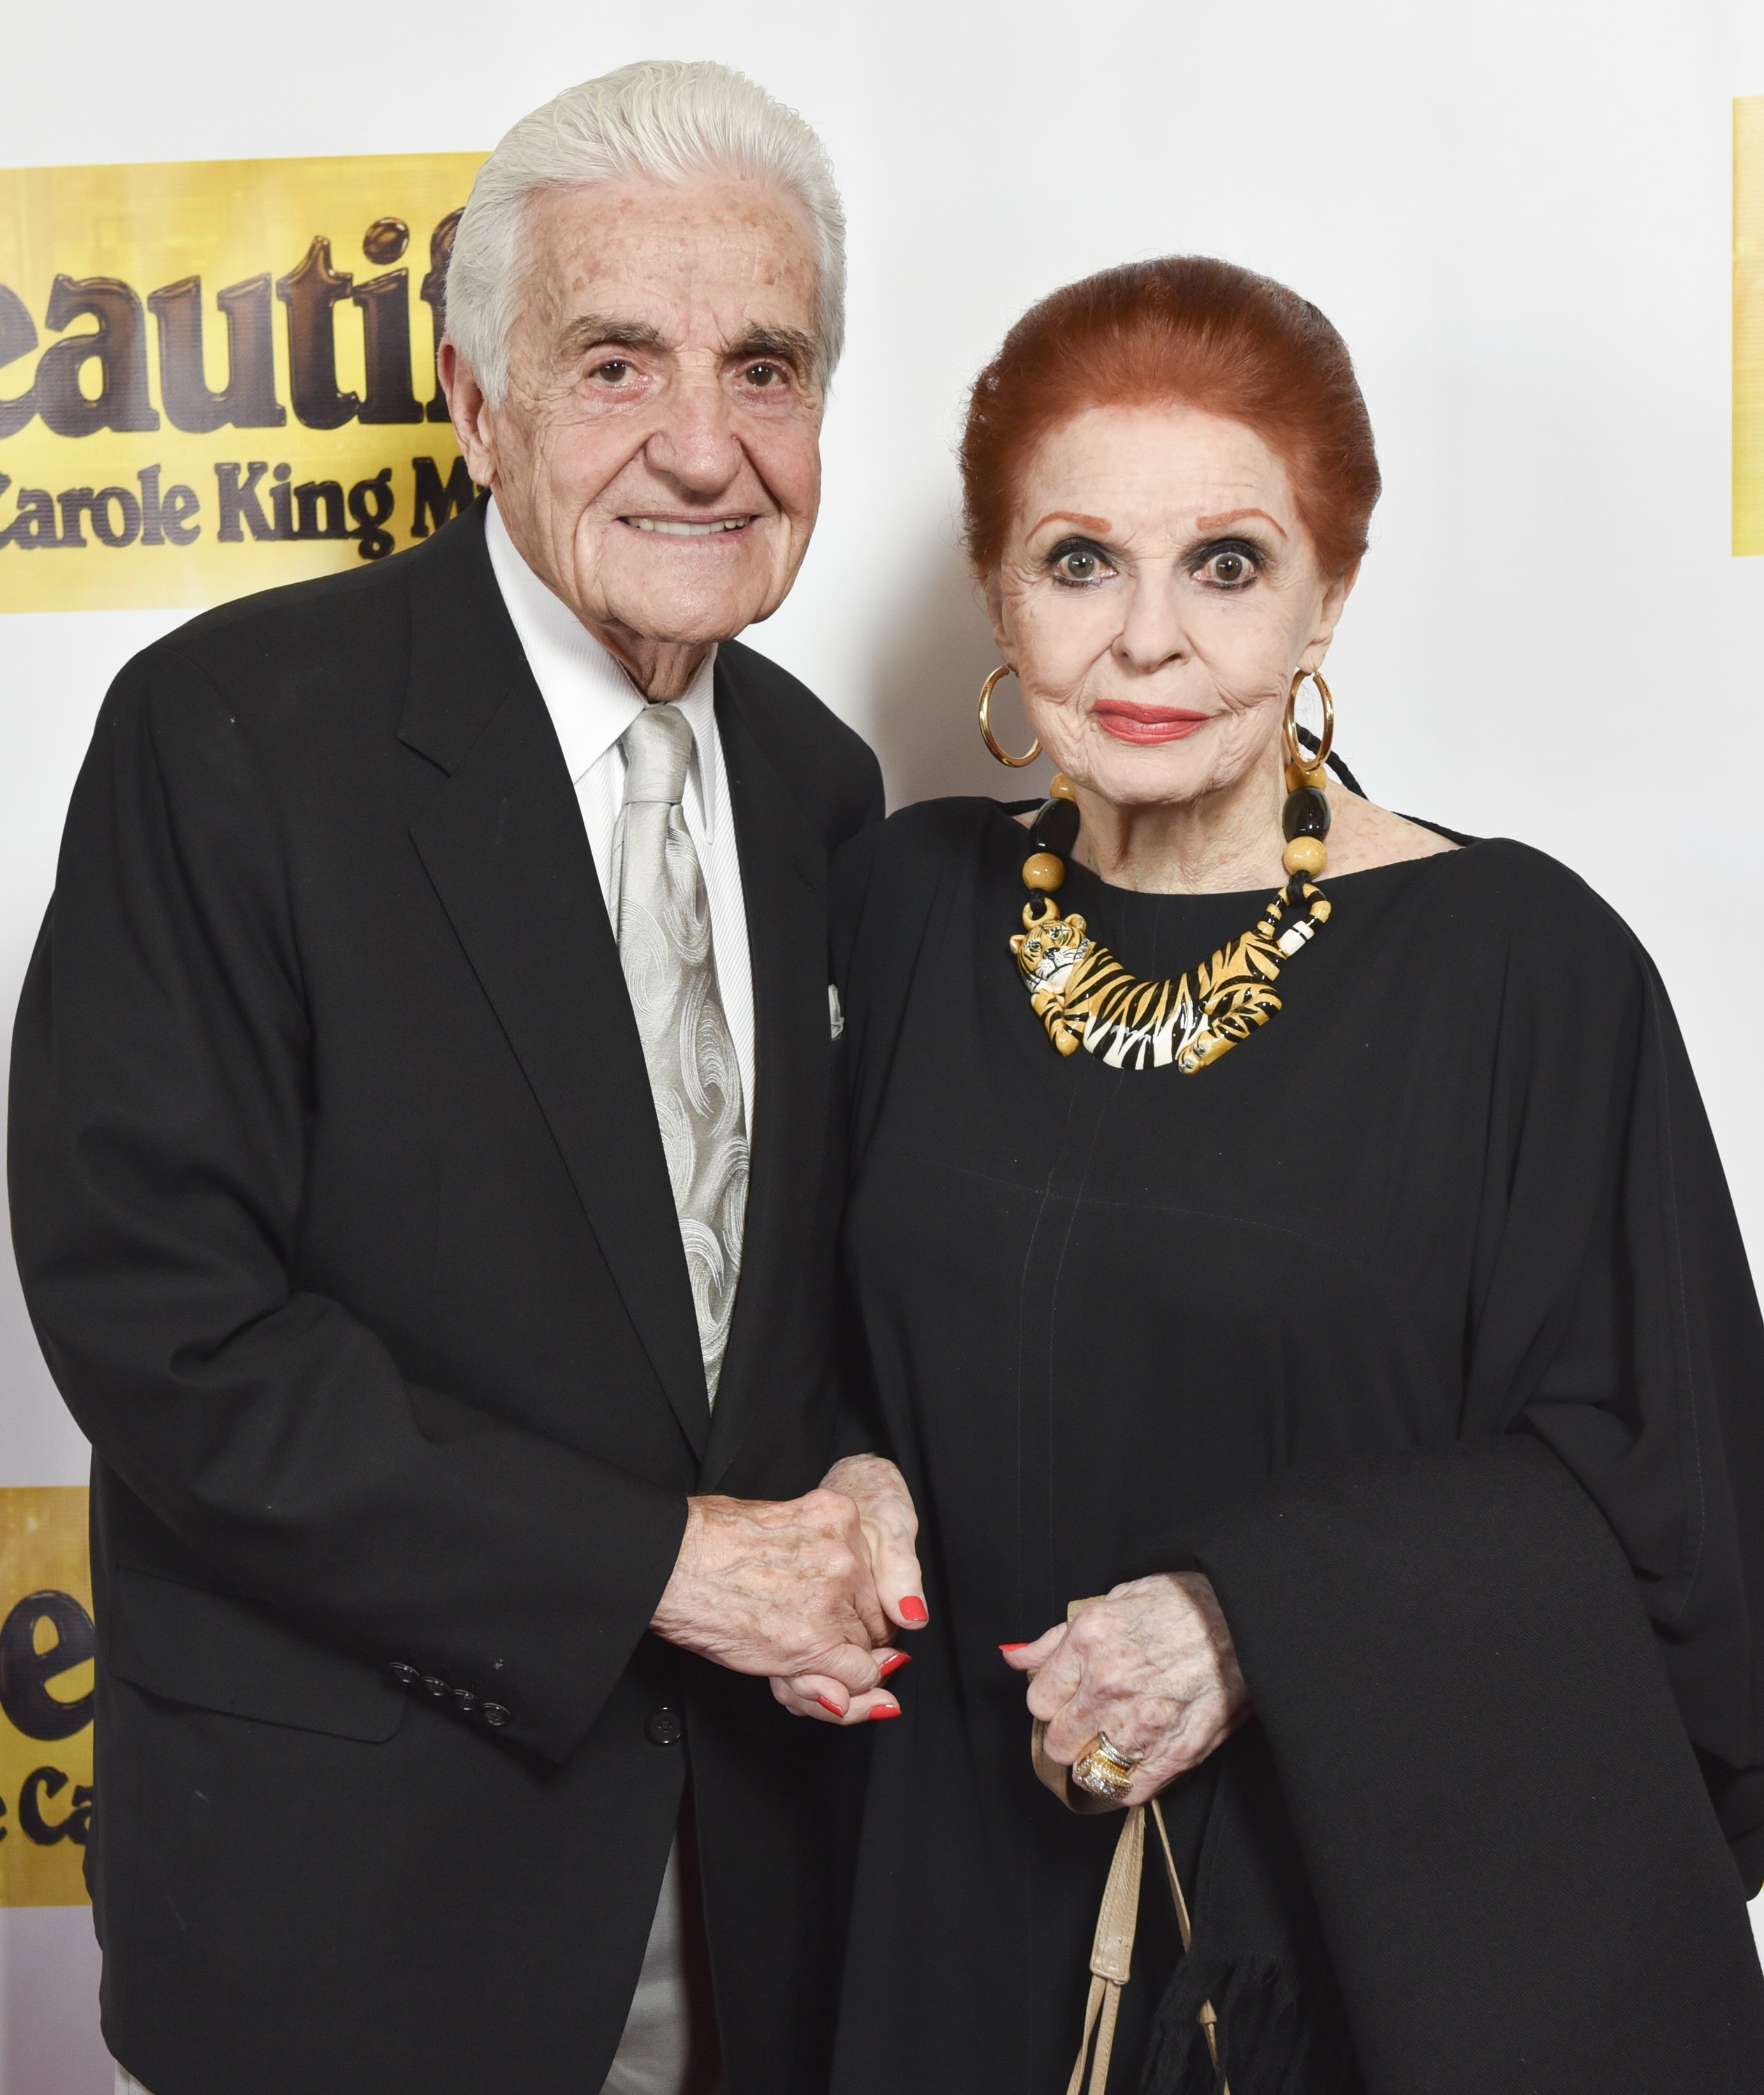 Tom Troupe and Carol Cook at the premiere of "Beautiful - The Carole King Musical" on June 24, 2016, in Hollywood, California | Source: Getty Images